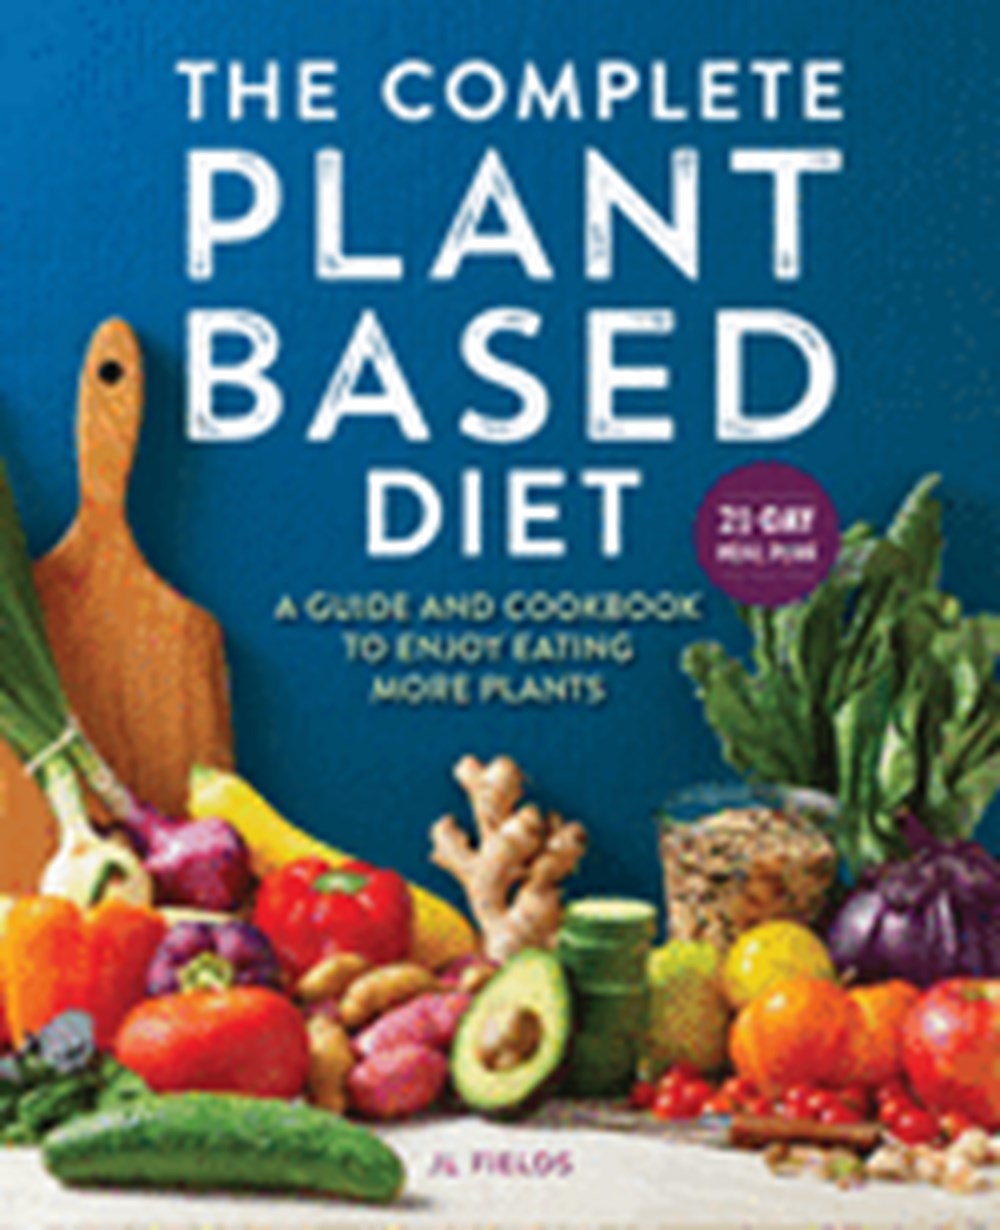 Complete Plant-Based Diet: A Guide and Cookbook to Enjoy Eating More Plants